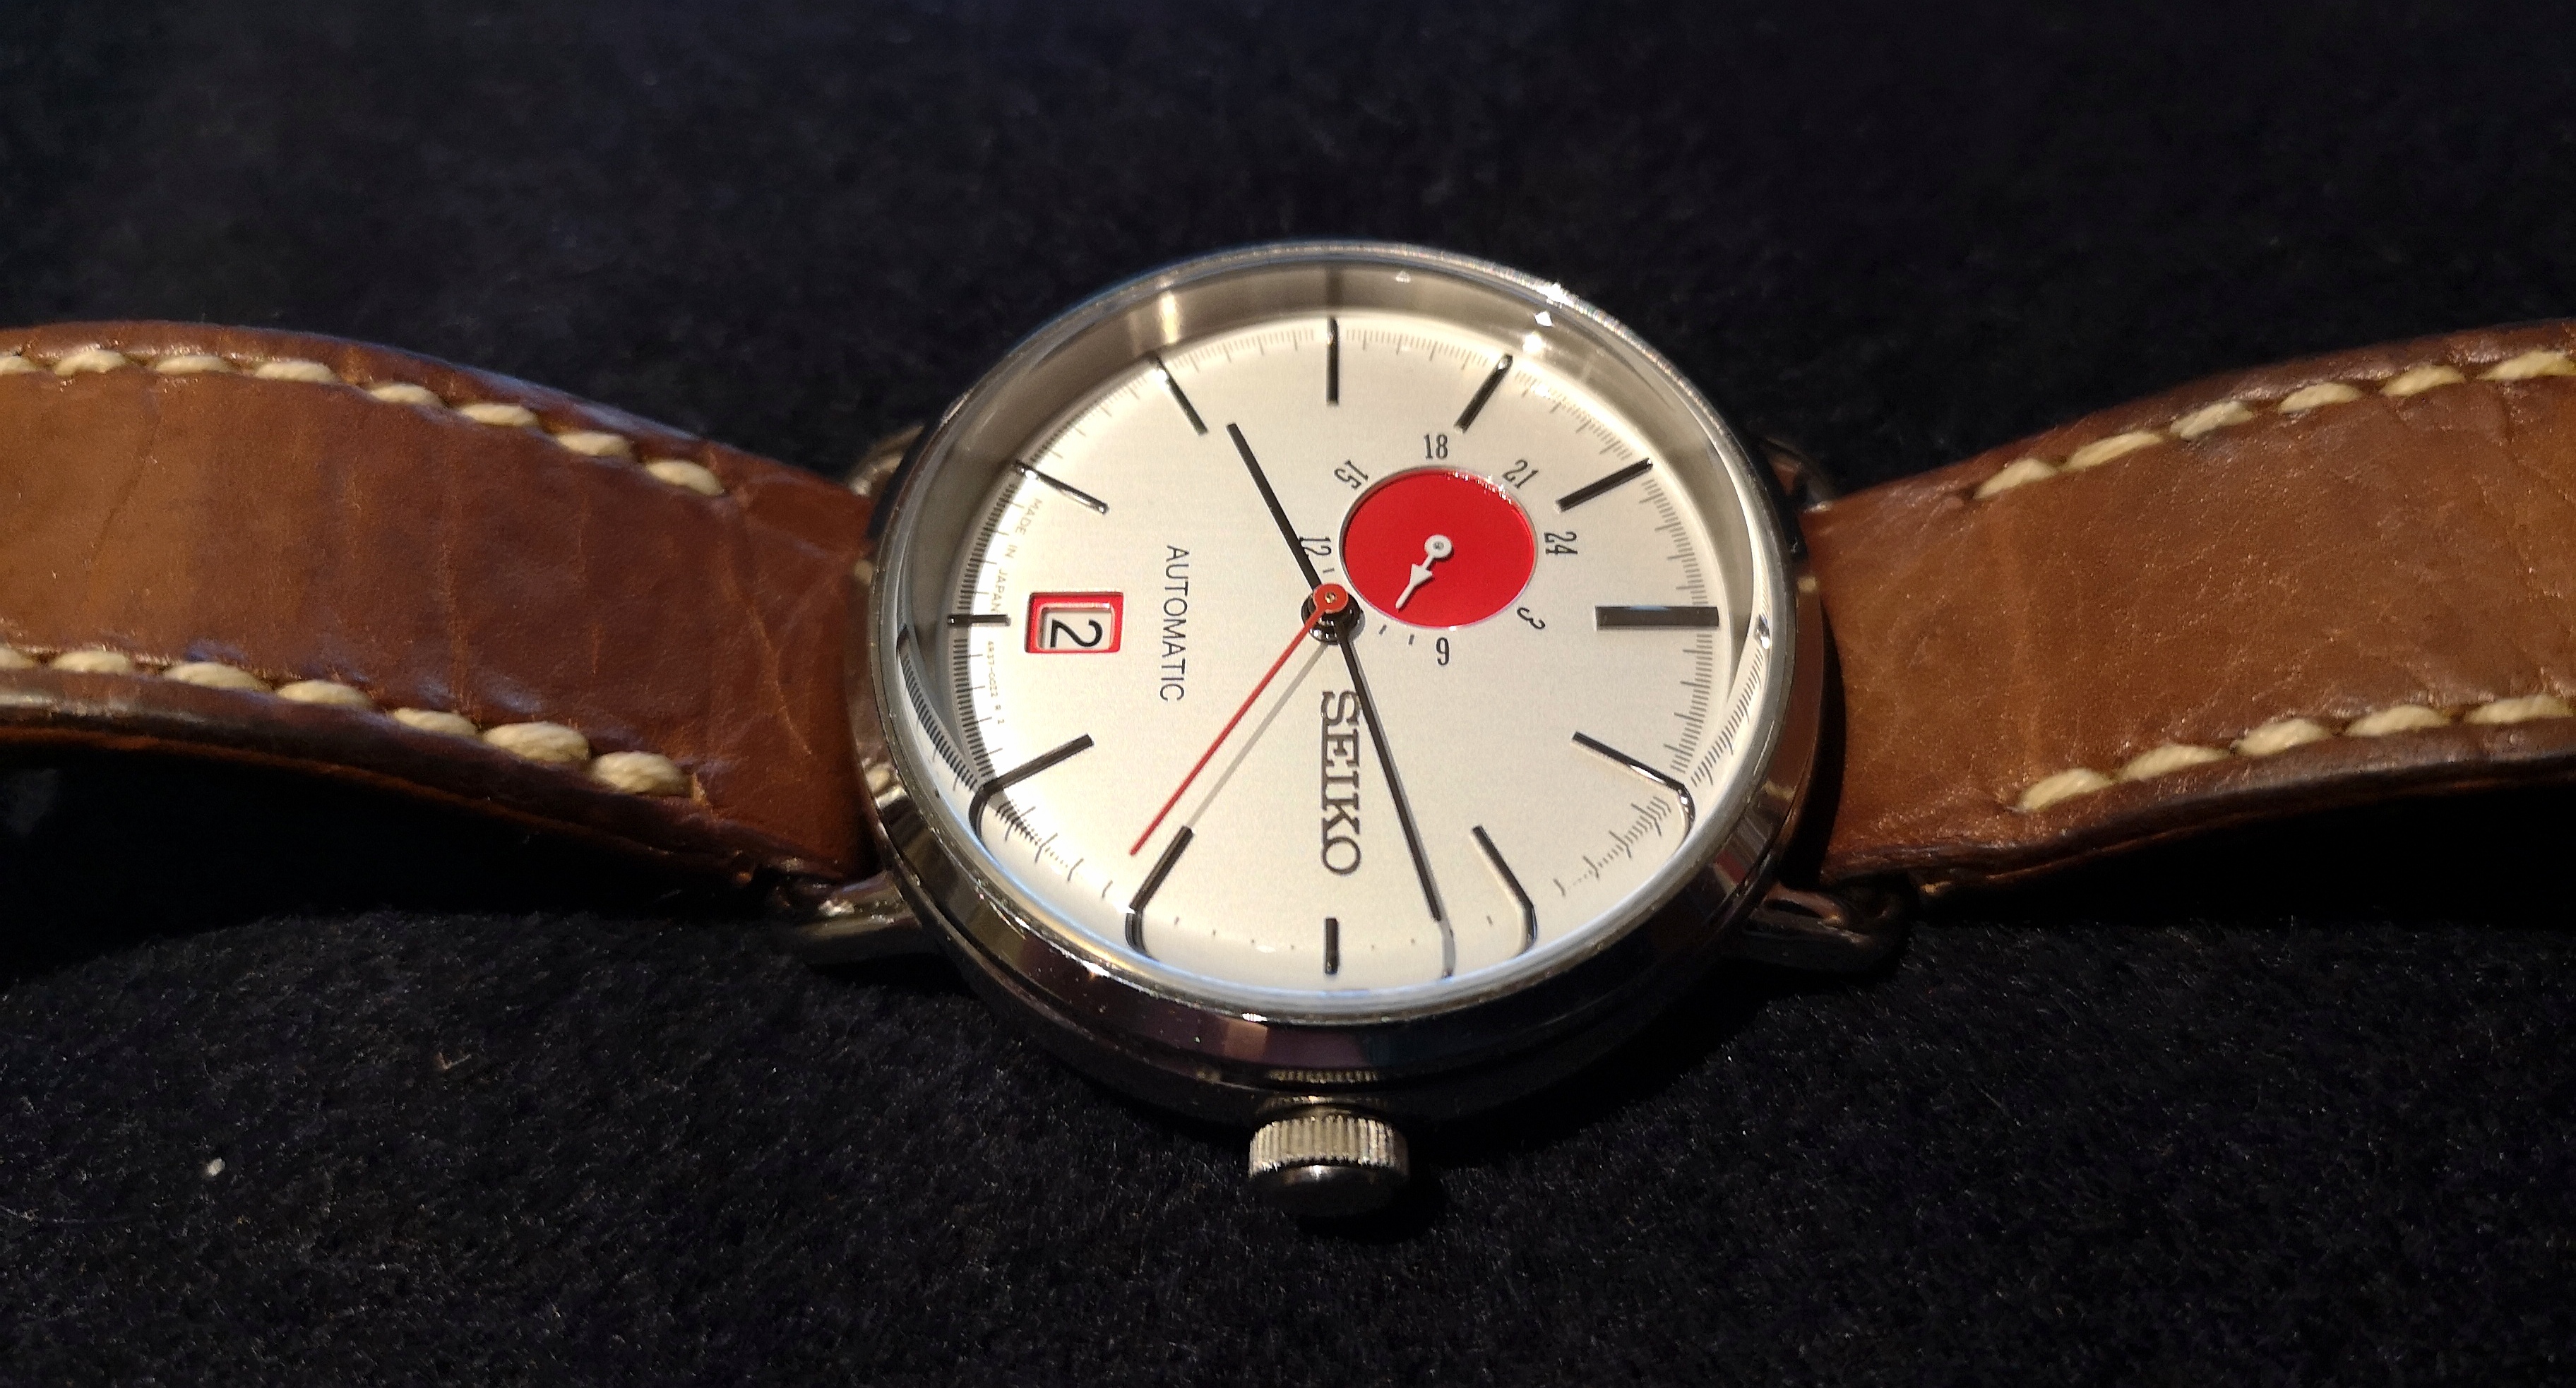 WTS] Seiko SCVE003 Rising Sun. Great condition + box & papers. $850/£685 |  WatchCharts